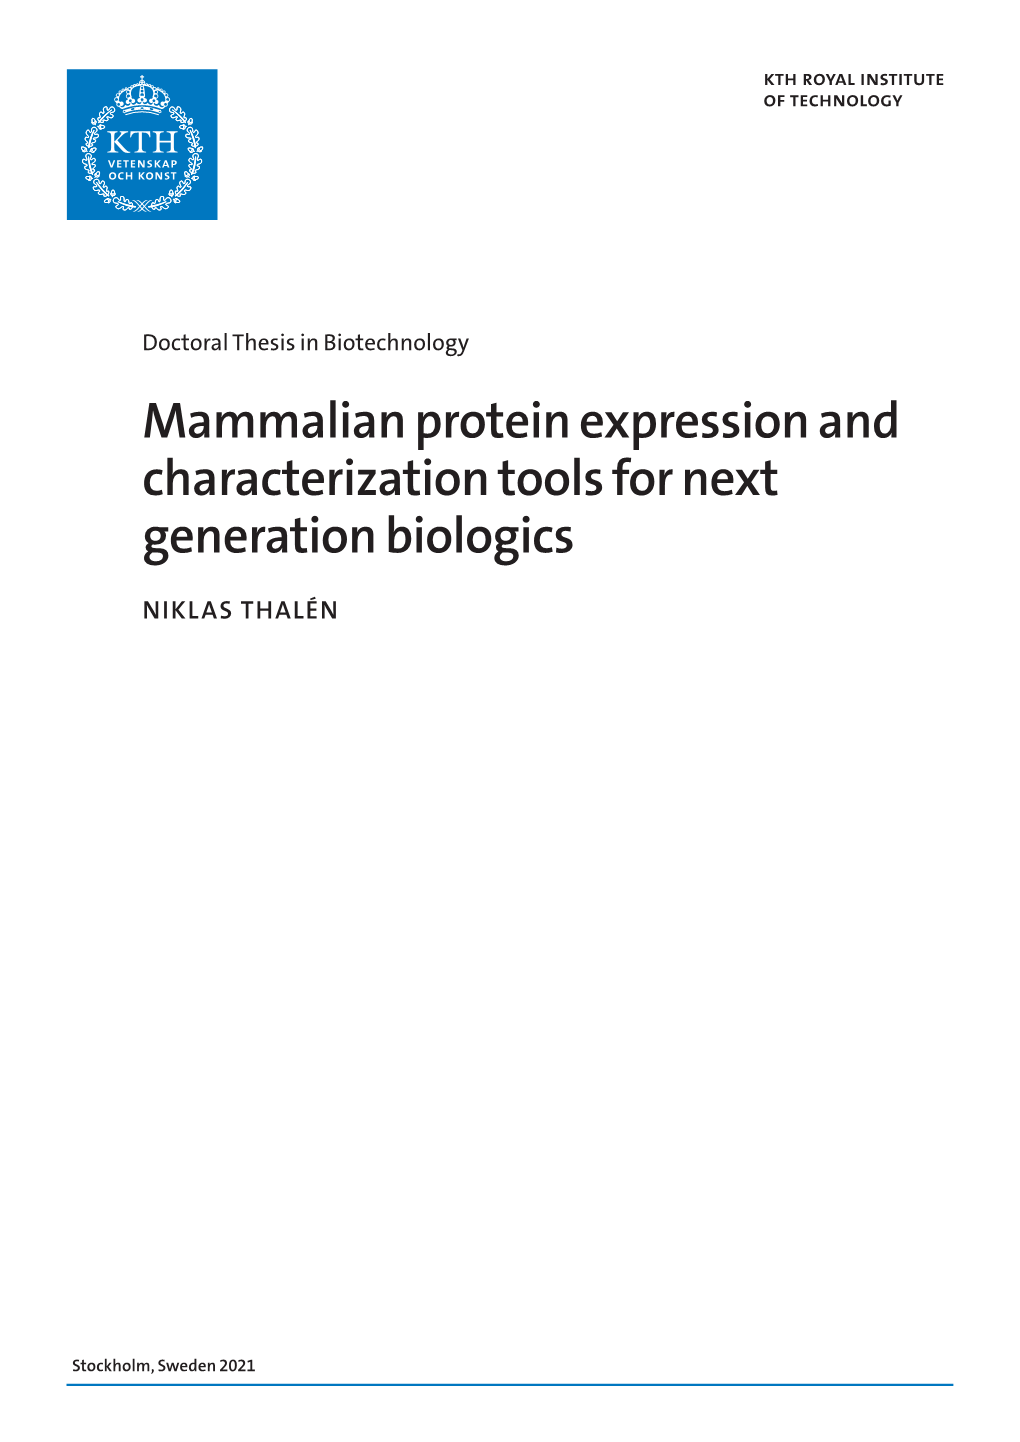 Mammalian Protein Expression and Characterization Tools for Next Generation Biologics